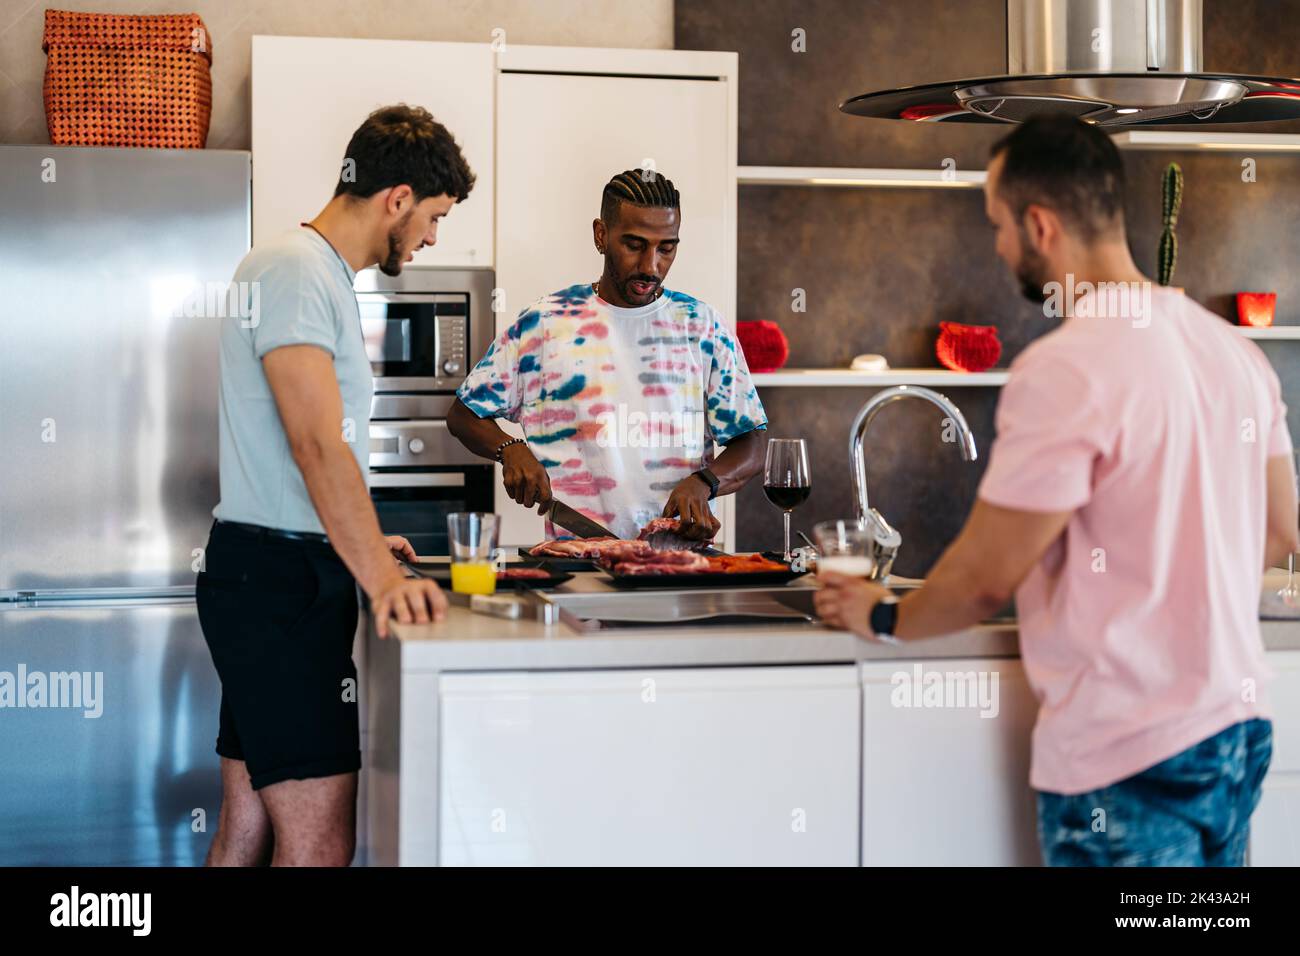 3 friends converse in a kitchen while one cuts meat with a knife Stock Photo